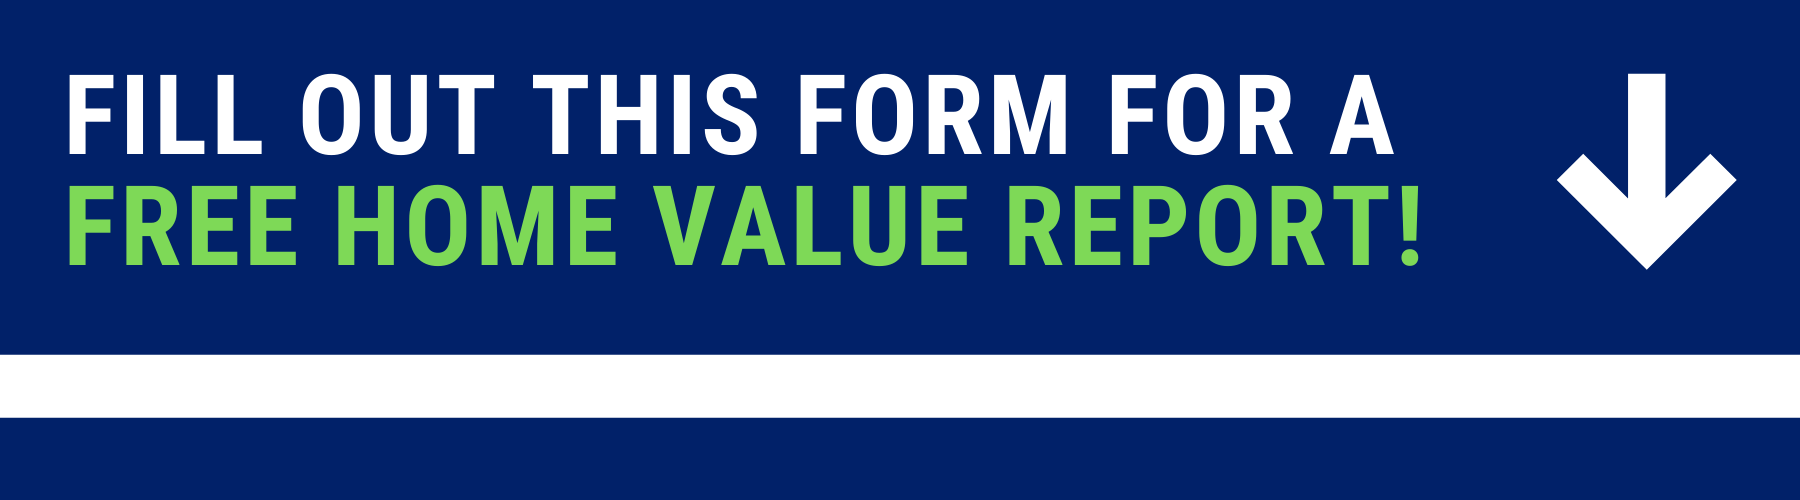 Fill out this form for a Free home value report! (1)